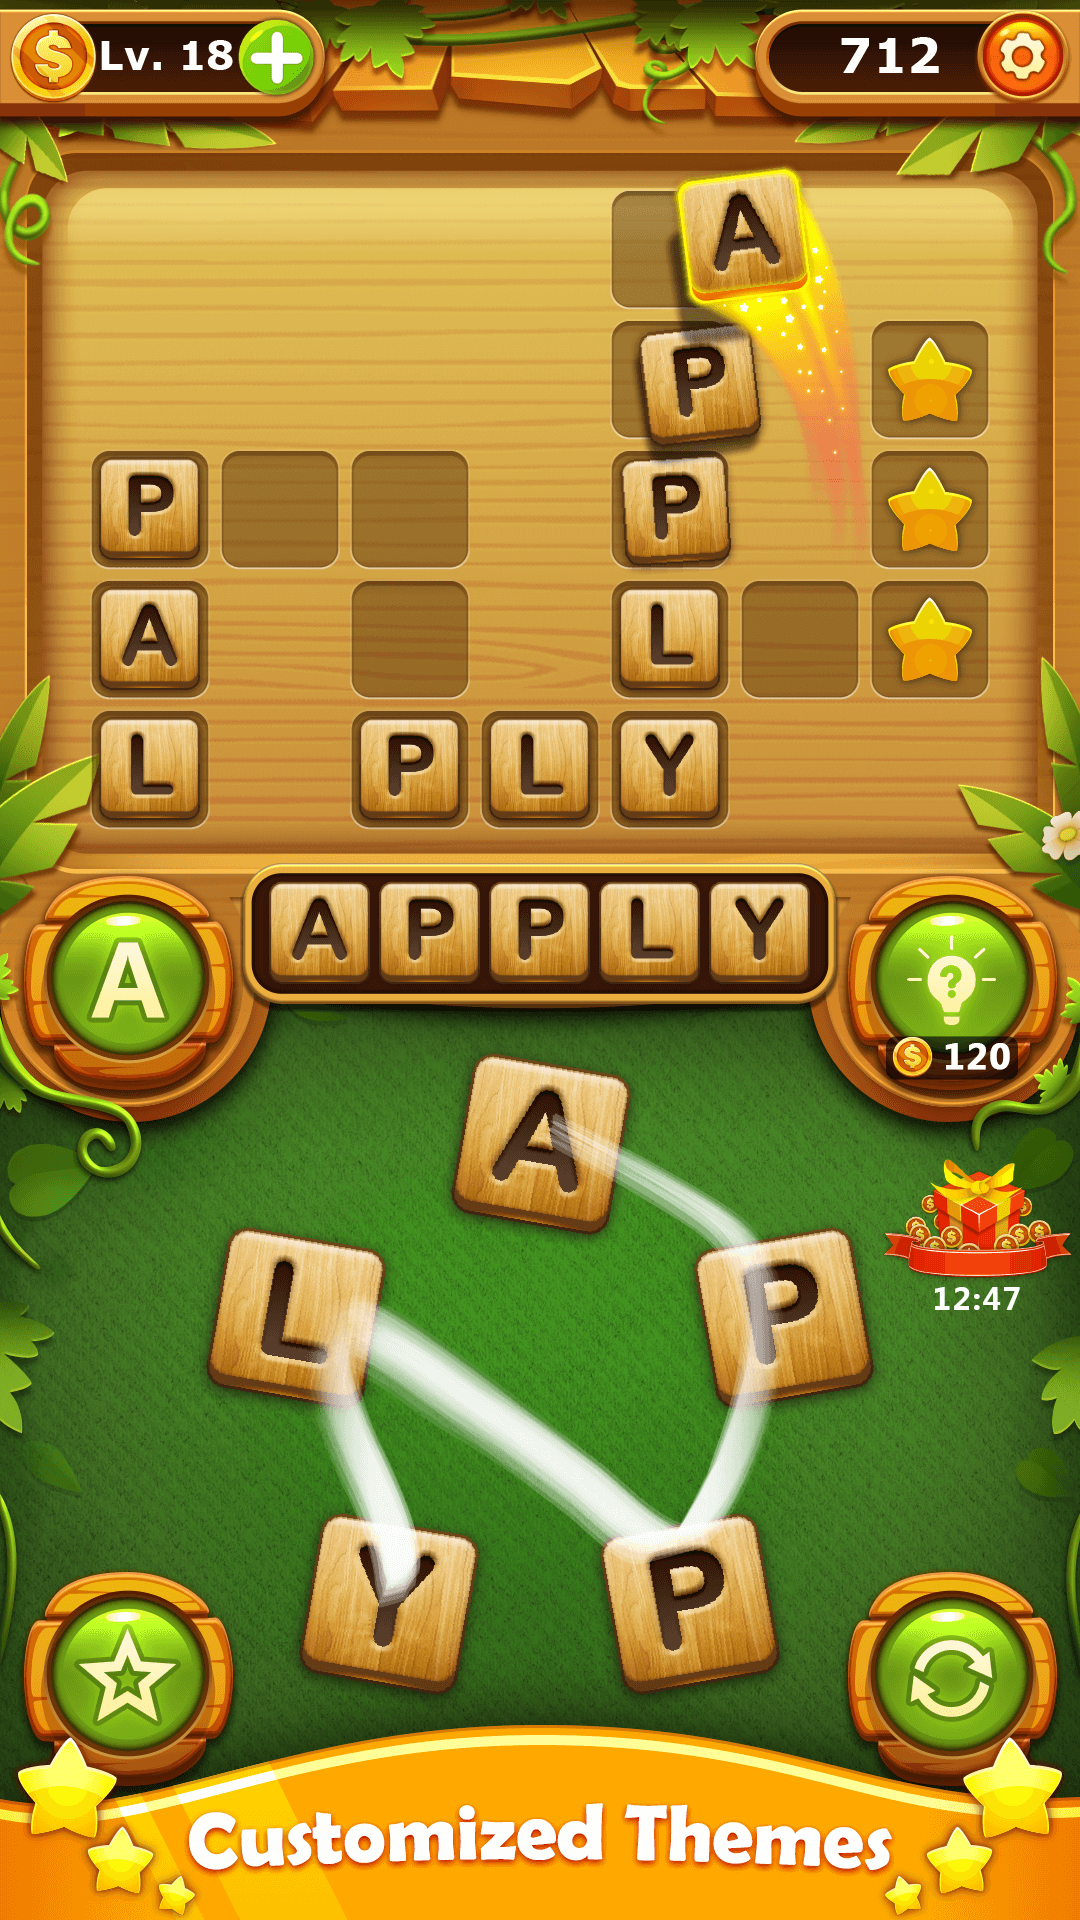 Word Games - Play word games for free on